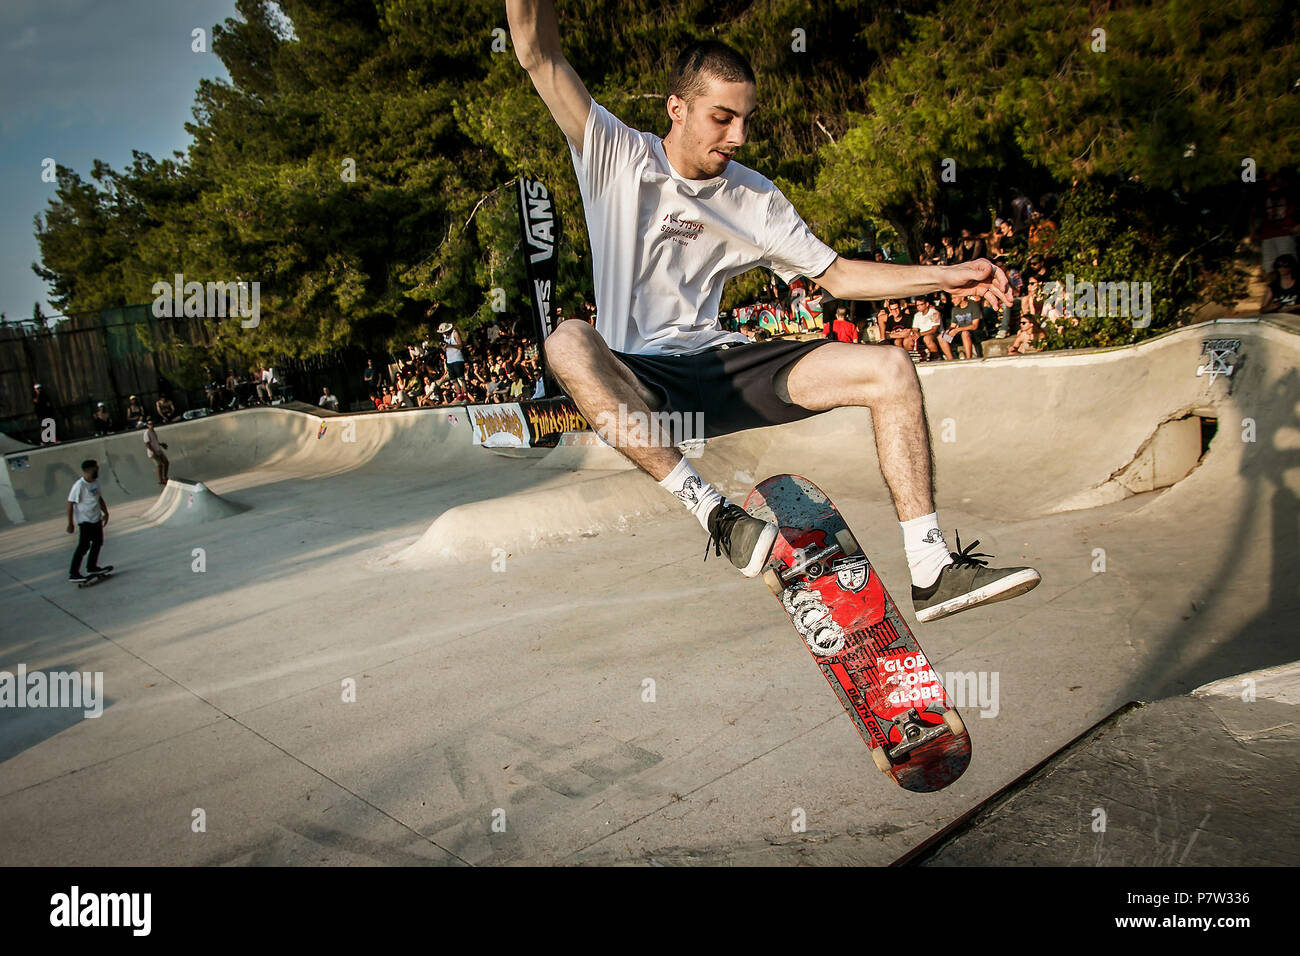 Athens, Greece. 7th July, 2018. A skateboarder competes during the 10th  Athens Skateboarding Championship "Skate and the City" in the Galatsi Skate  Park in Athens, Greece, July 7, 2018. Credit: Panagiotis  Moschandreou/Xinhua/Alamy